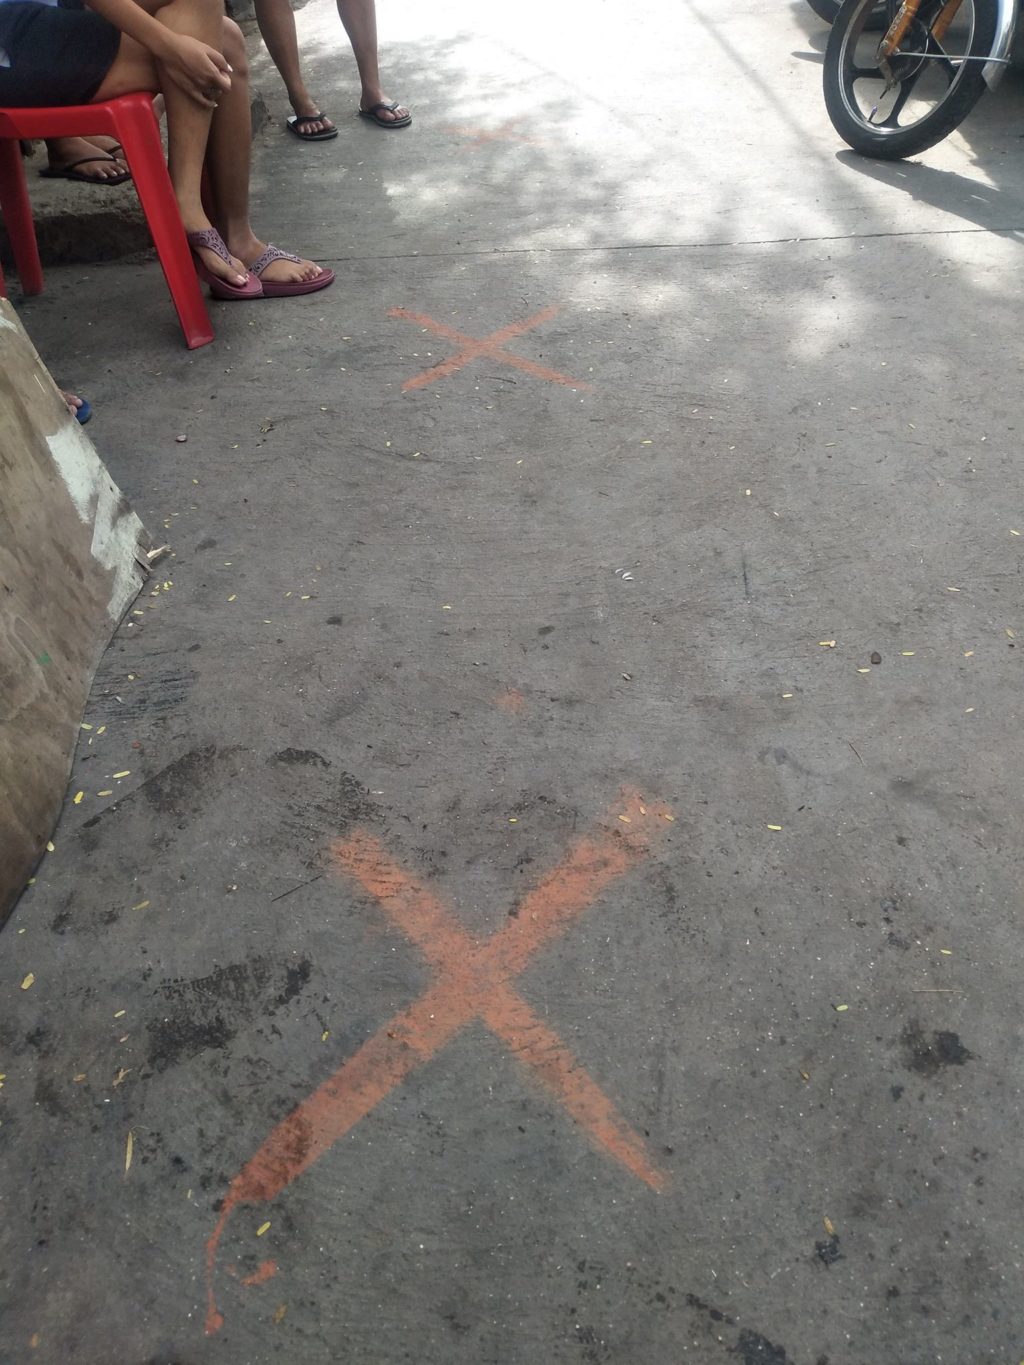 Ghen Camañero of Barangay Tisa, Cebu City makes sure that they will not violate any protocols and draws markers for social distancing for the residents to follow before they can receive the free porridge. | Contributed photo